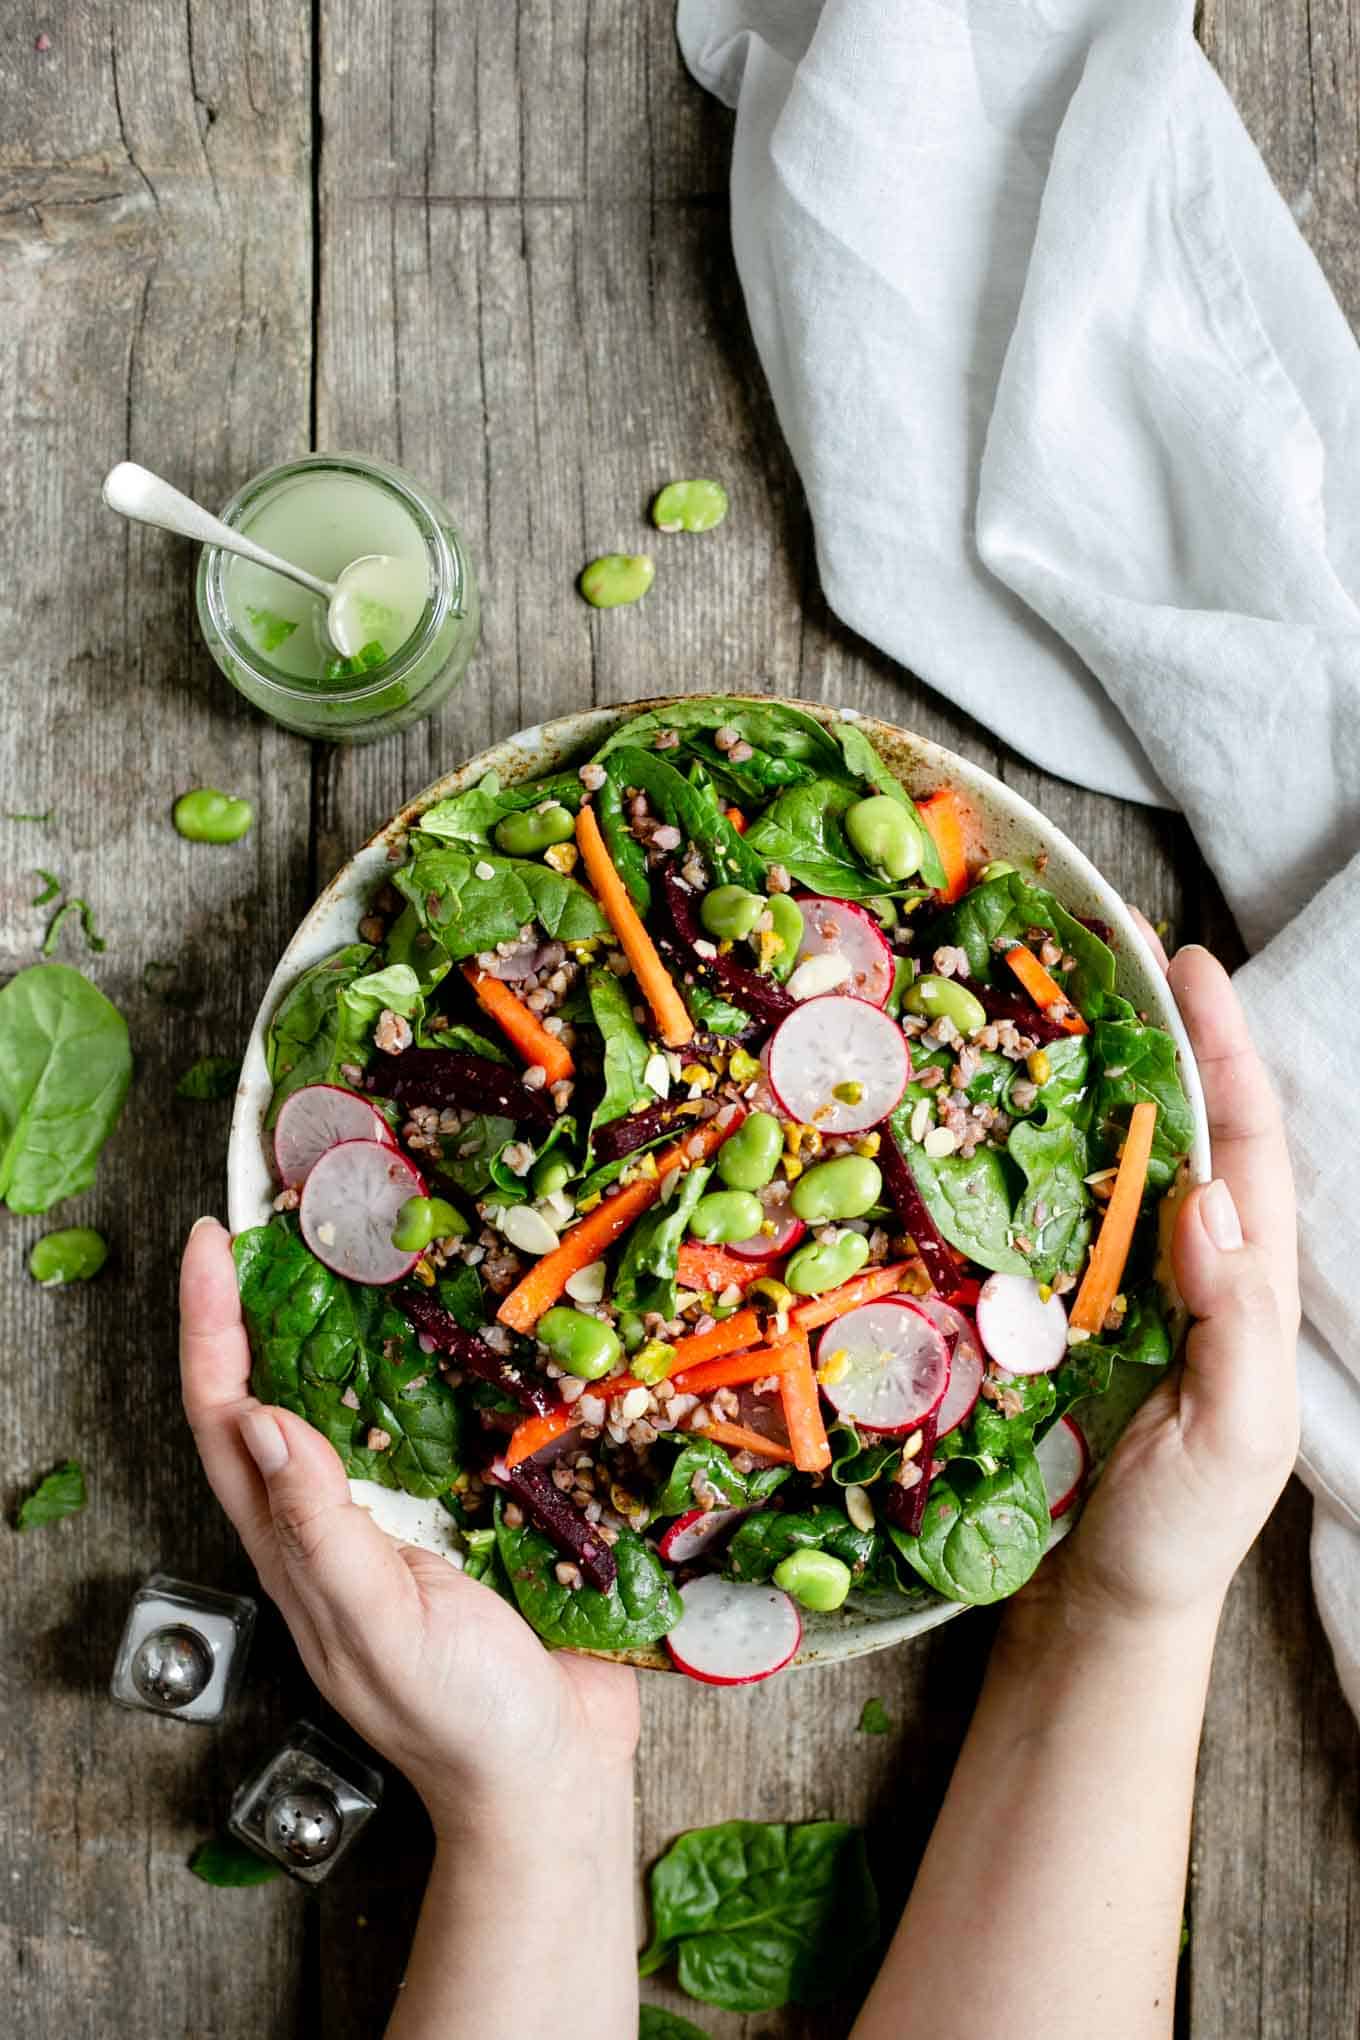 Spinach and beetroot salad packed with fresh vegetables #healthysalad #veganrecipe #dairyfree | via @annabanana.co